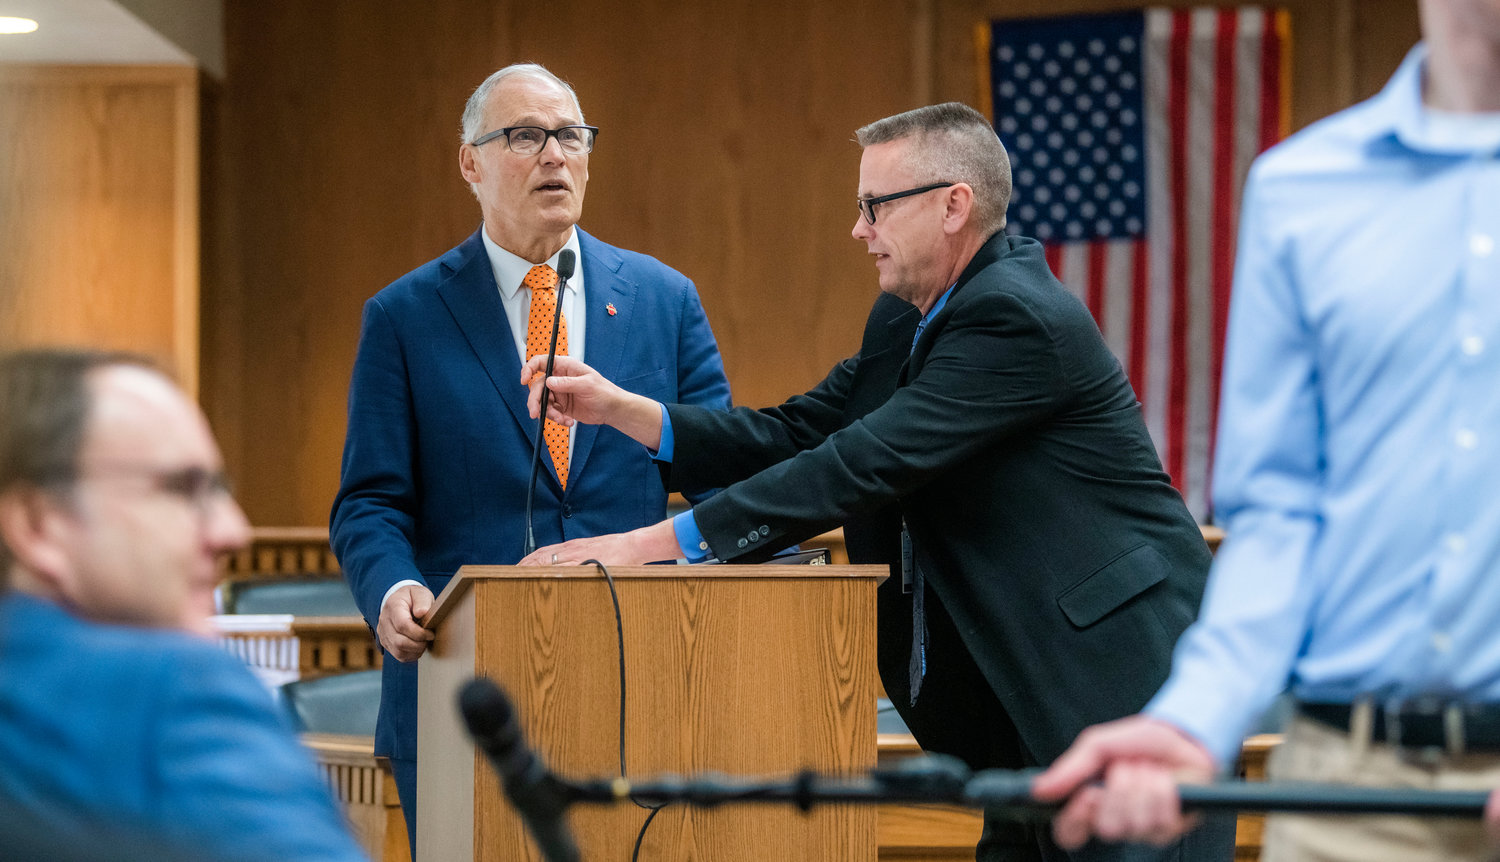 A mic is adjusted for Governor Jay Inslee before he takes question from members of the press on Thursday inside the John A. Cherberg Building in Olympia.